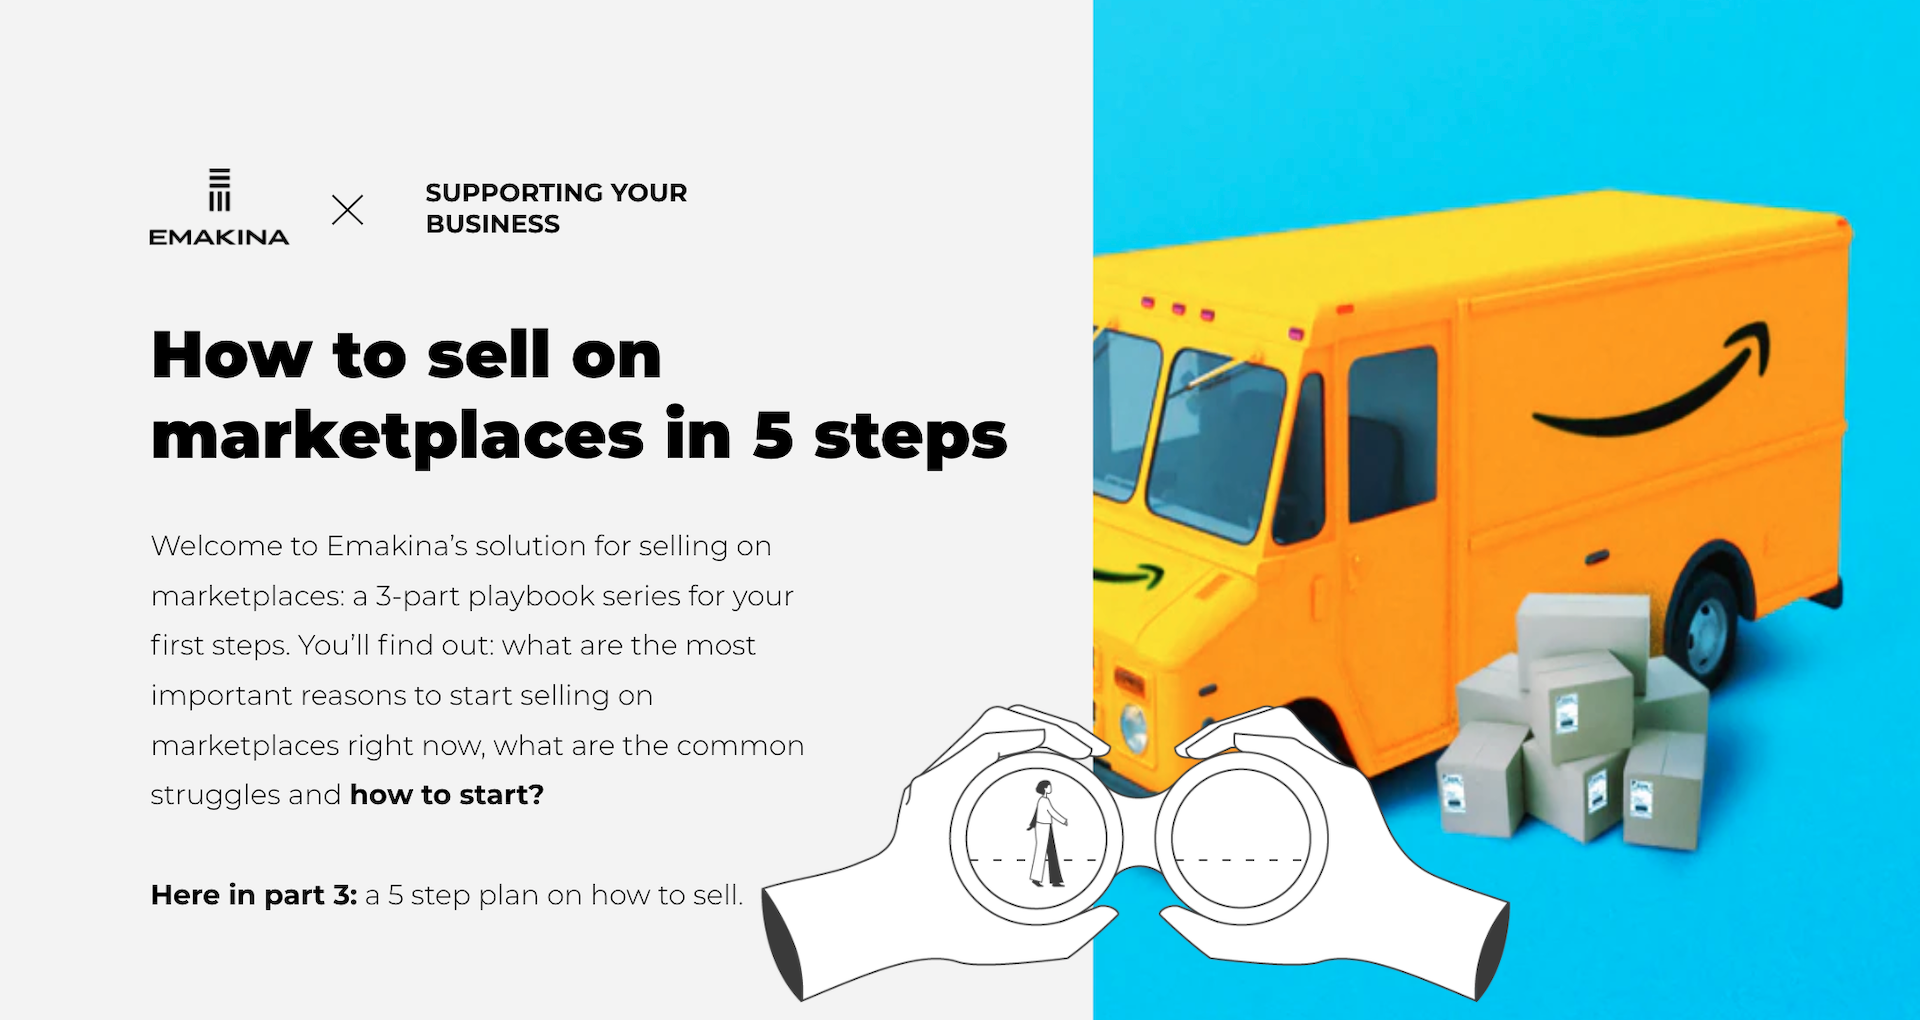 How to sell on marketplaces in 5 steps